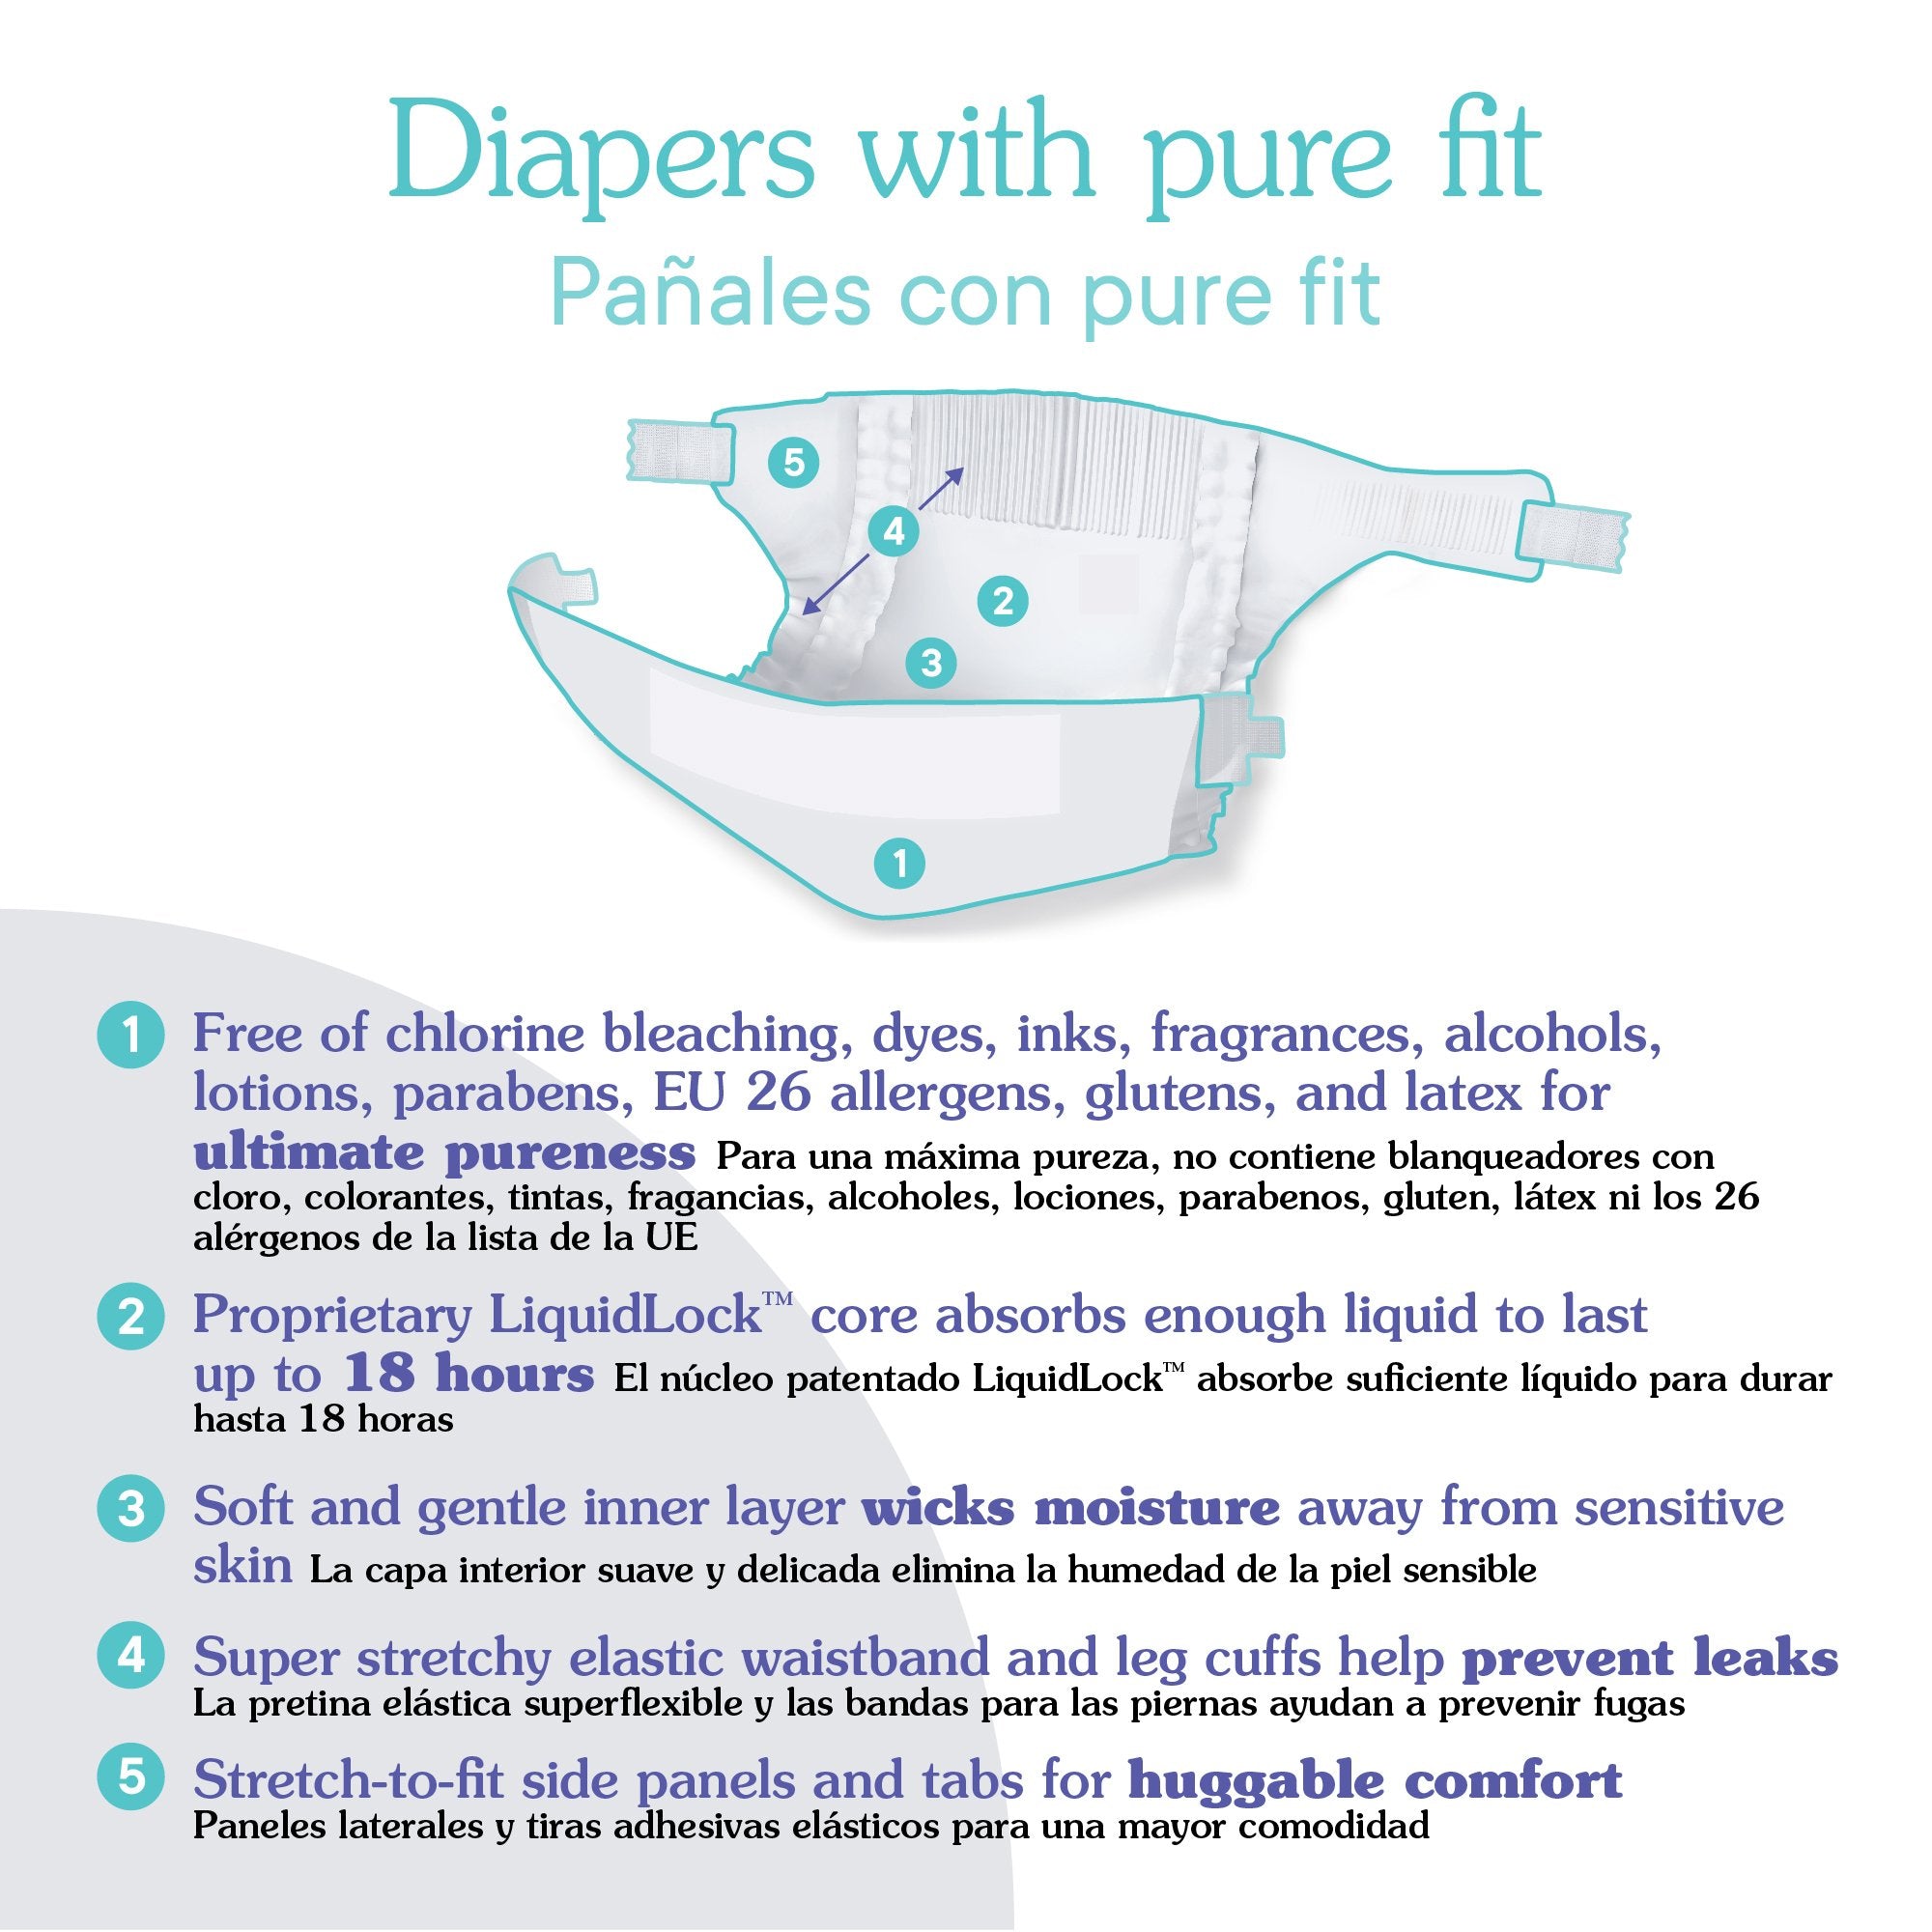 PurePail™ Disposable Diapers, Size 3, 16-28 lbs, 168 Ct